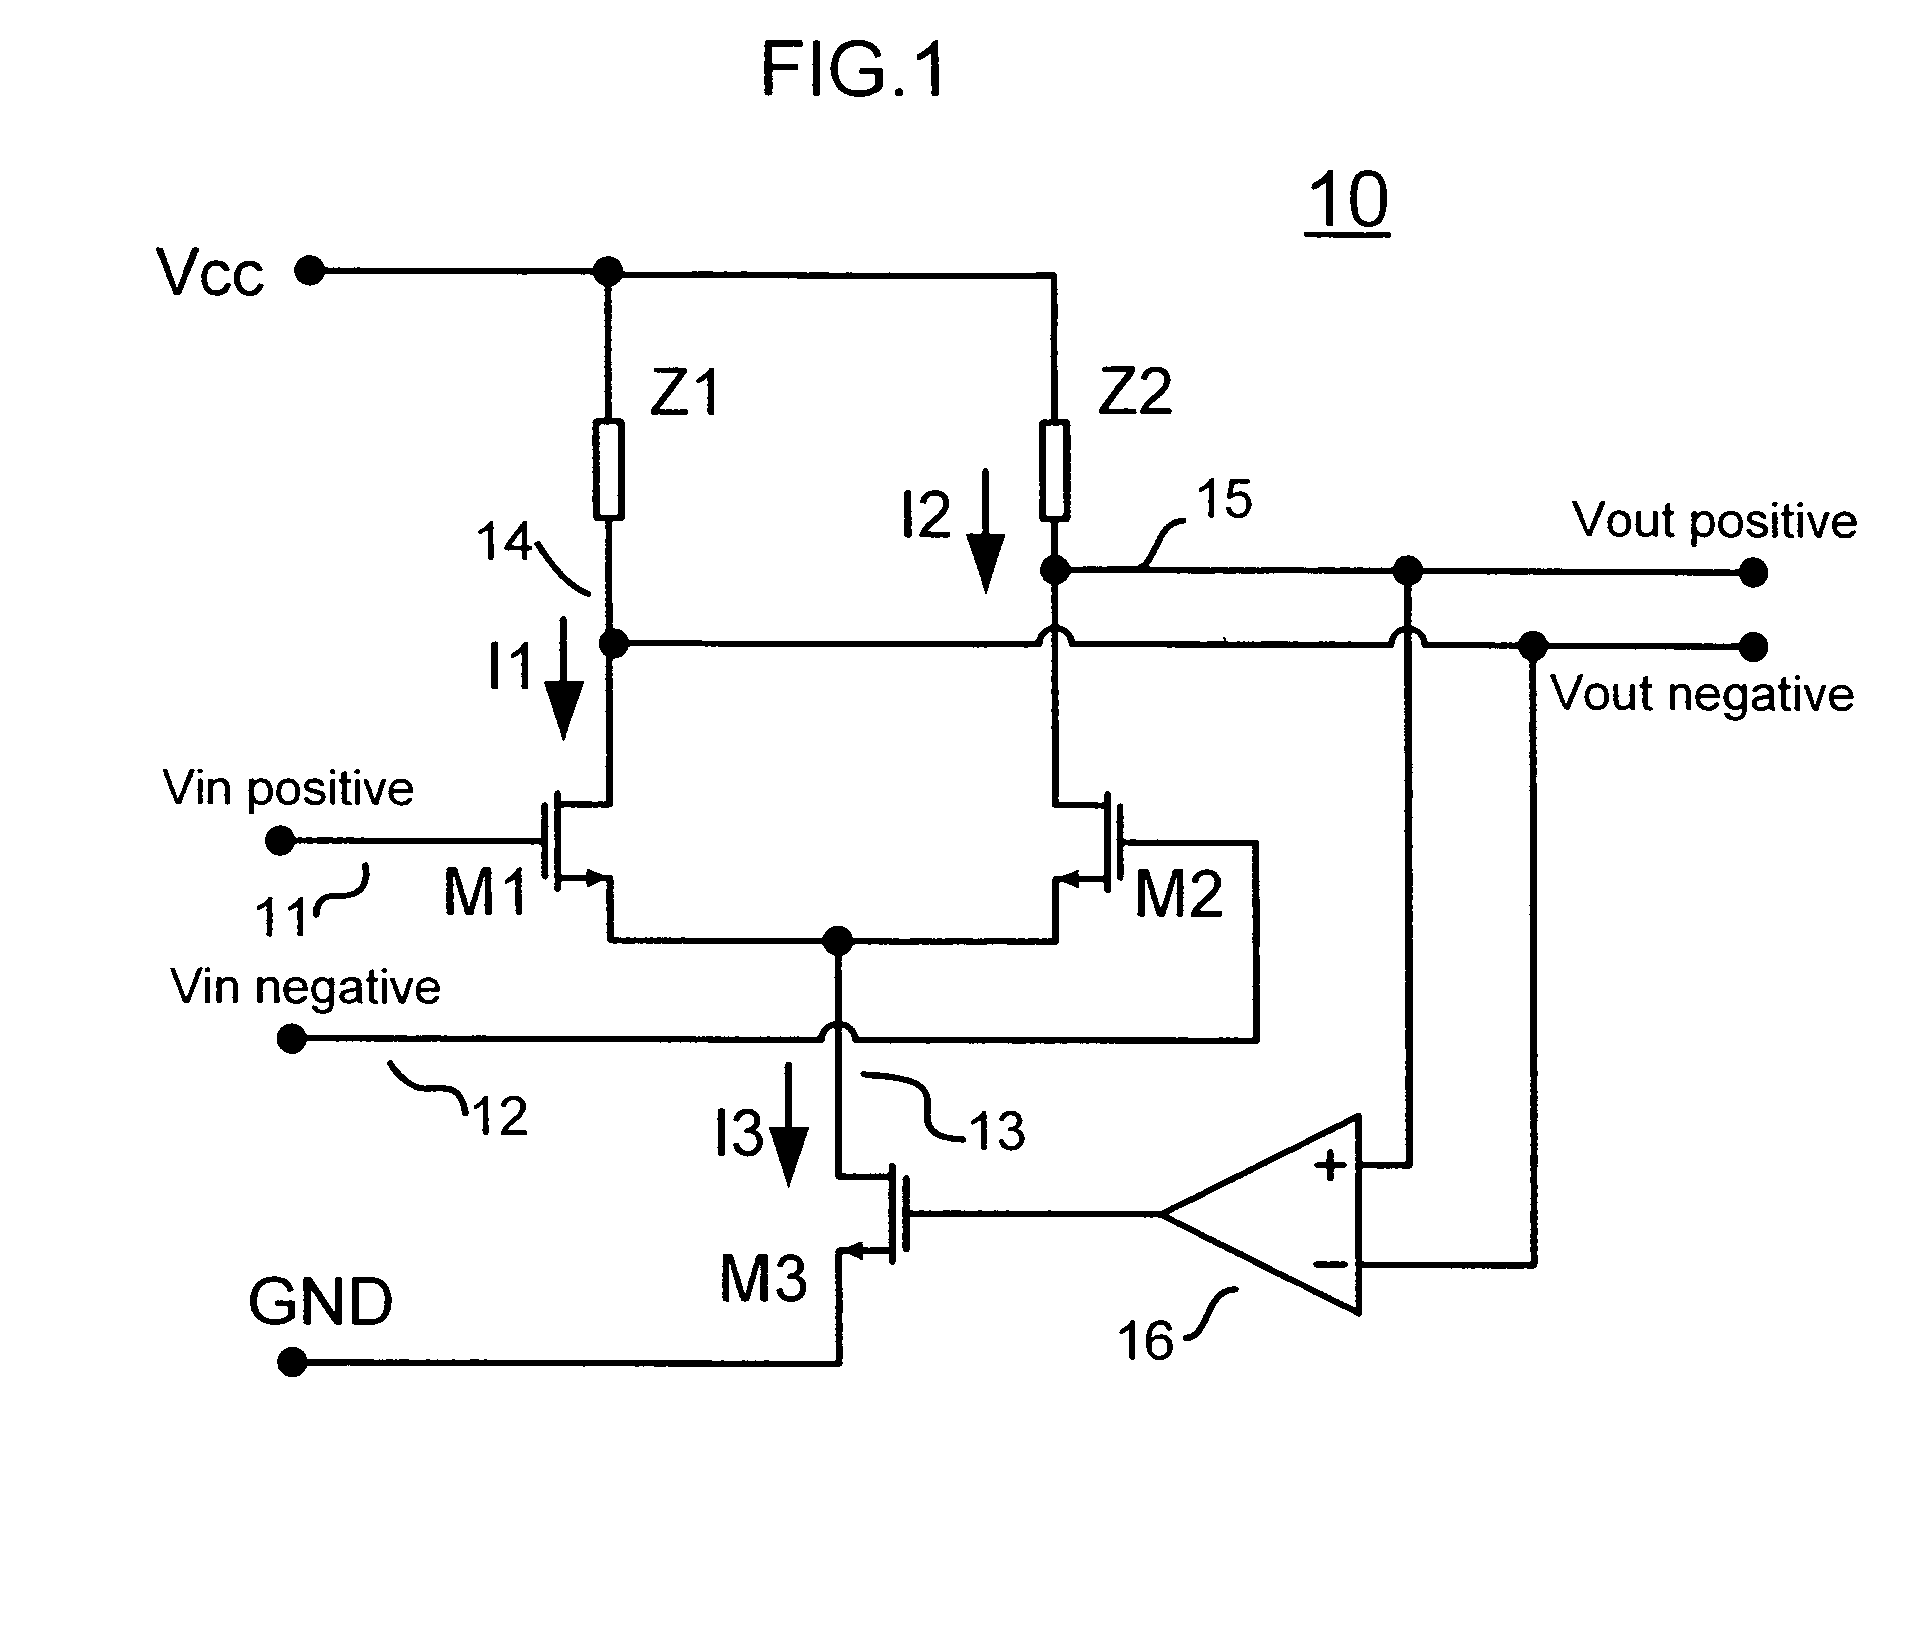 Differential amplifier with current source controlled through differential feedback